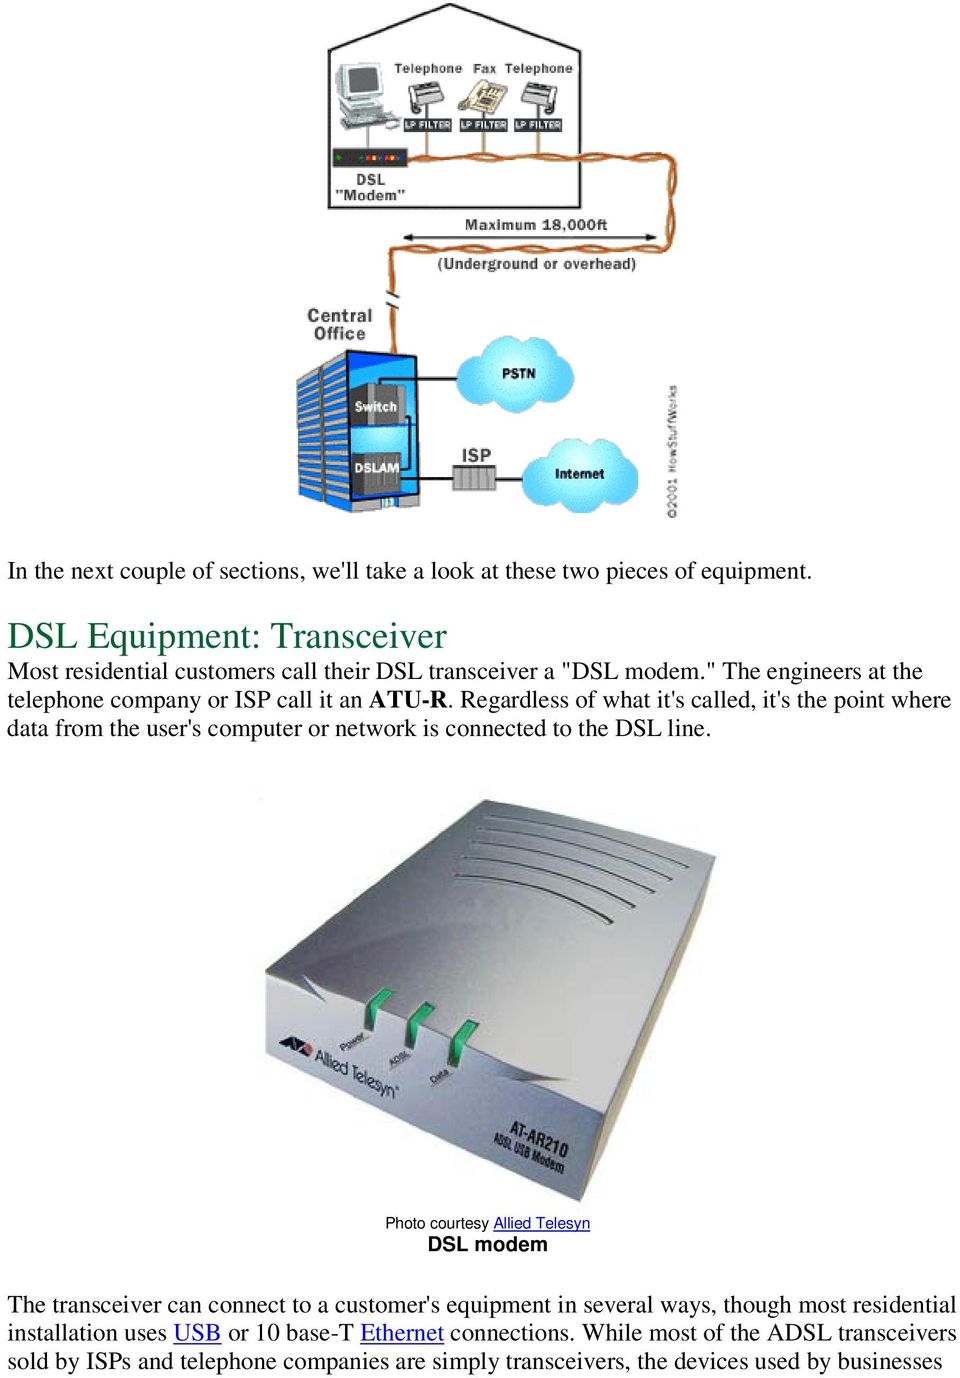 Regardless of what it's called, it's the point where data from the user's computer or network is connected to the DSL line.